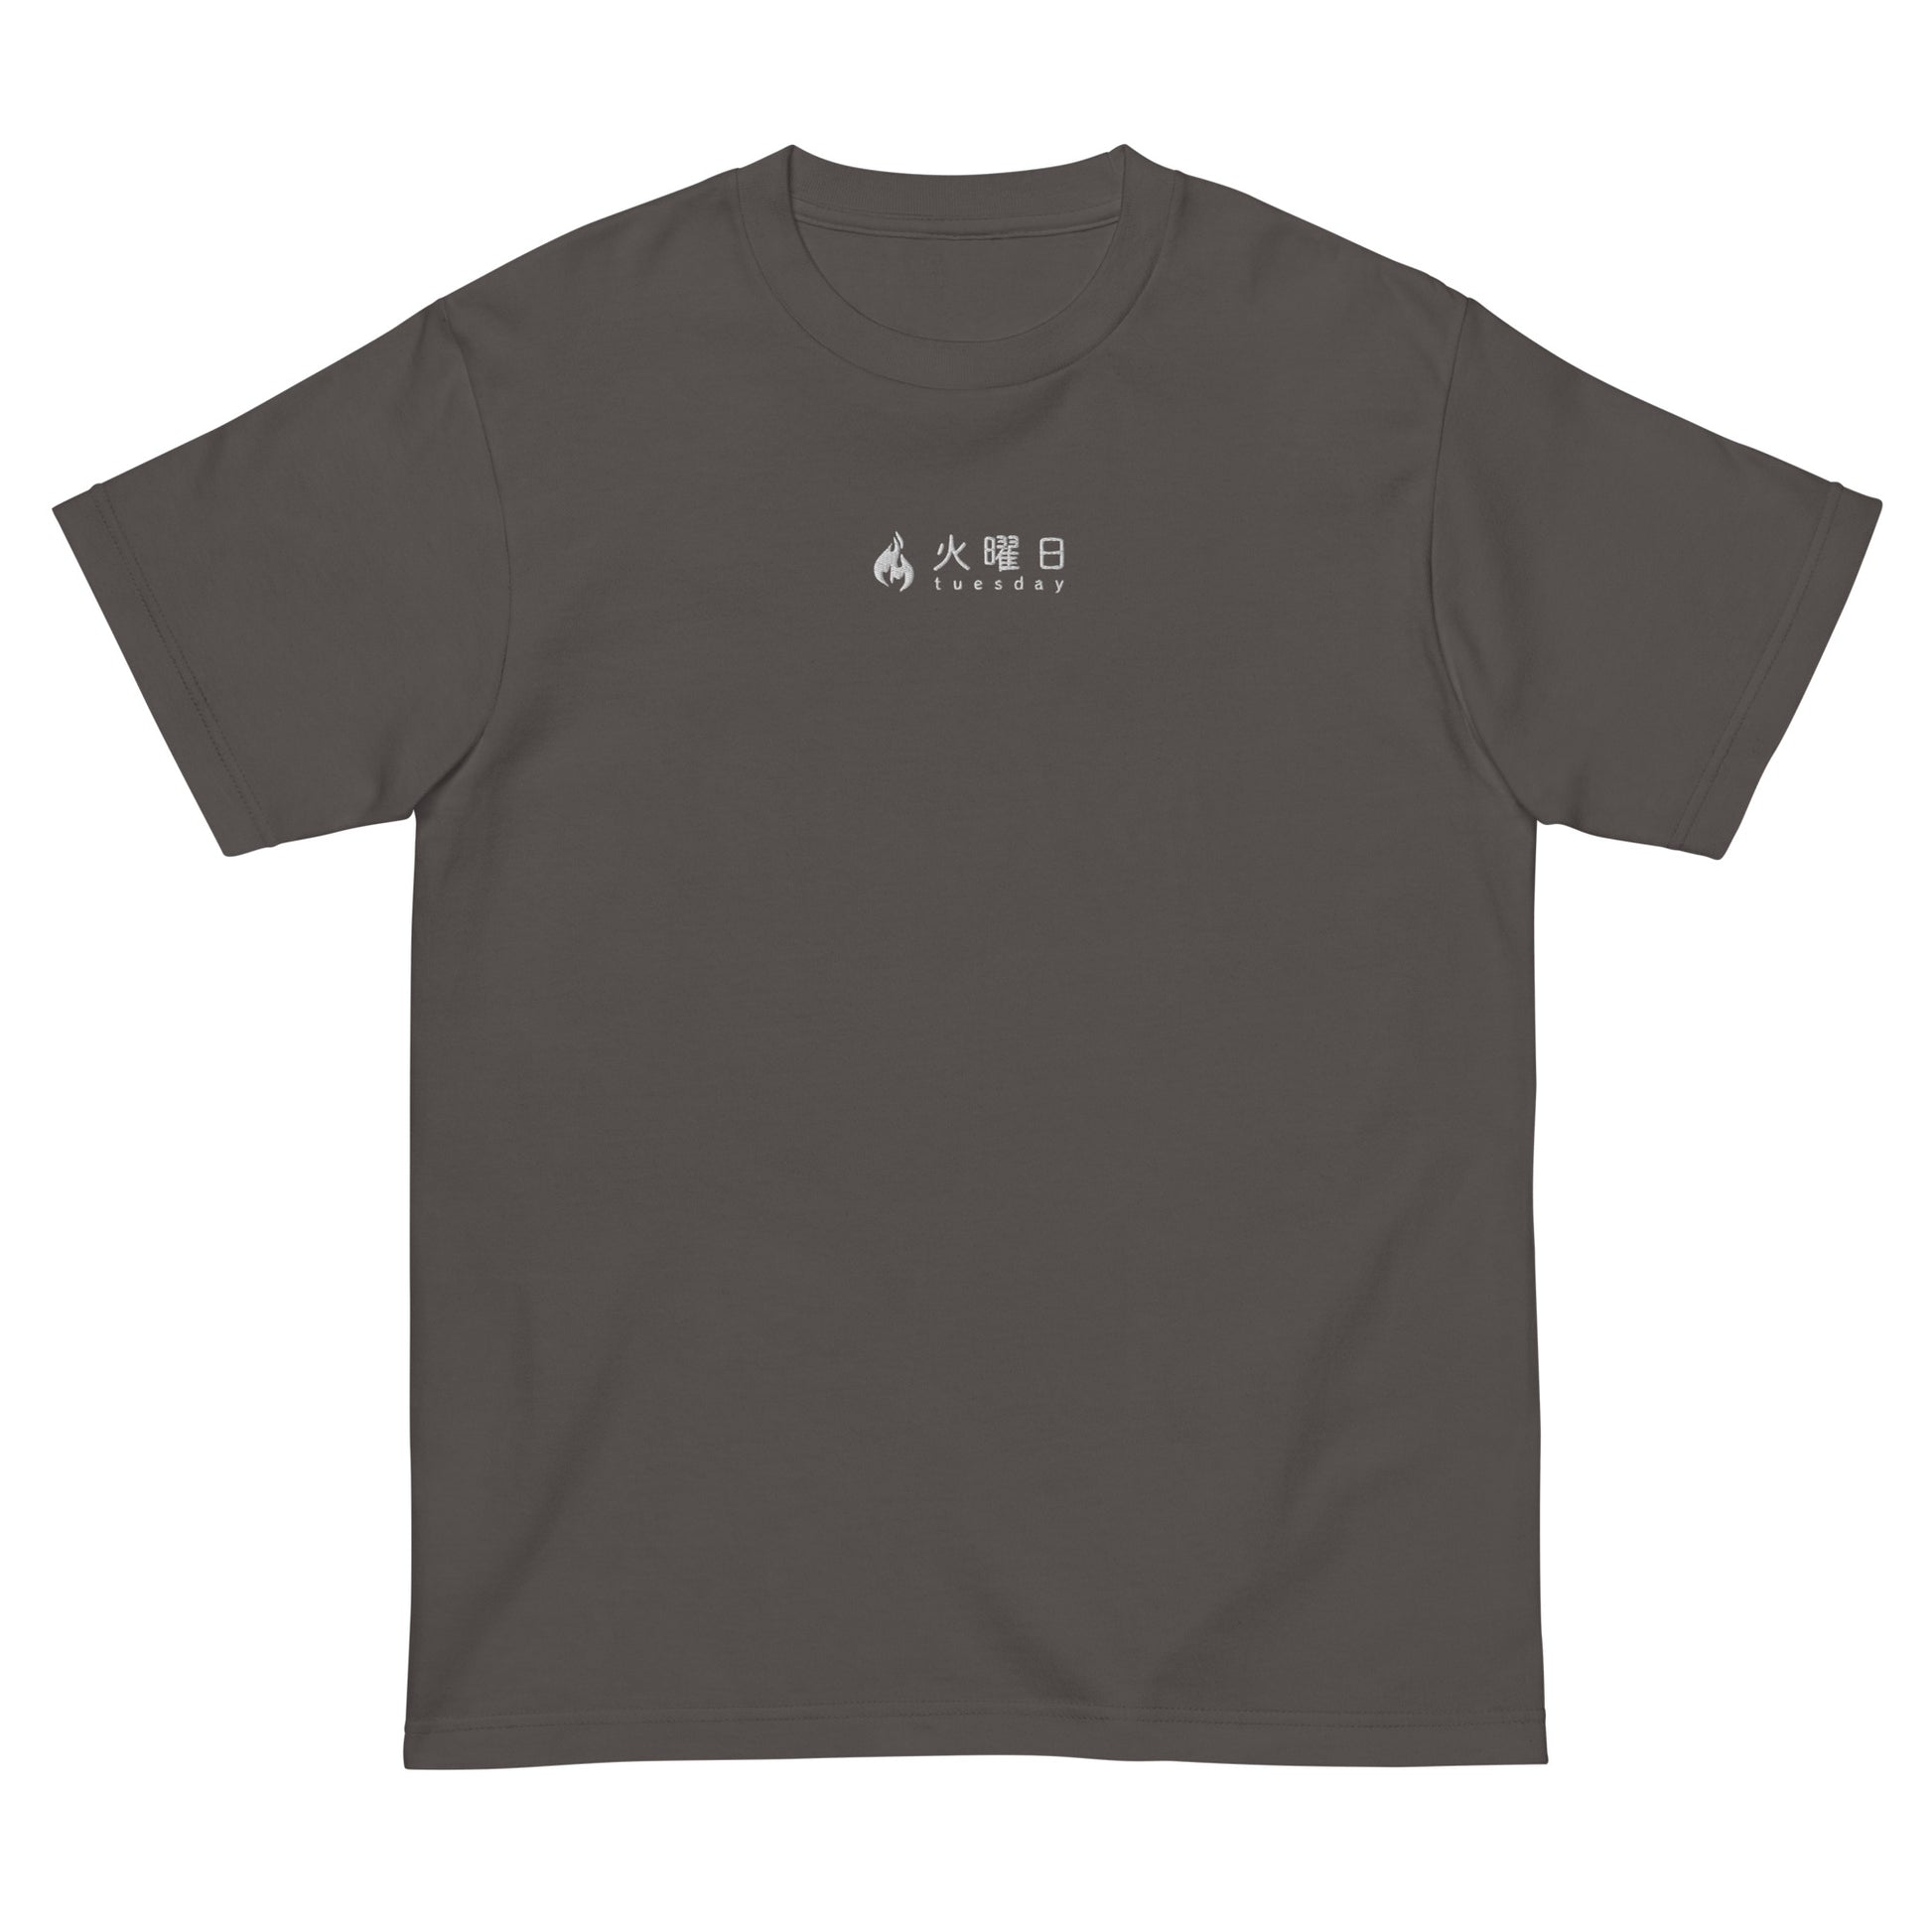 Dark Gray High Quality Tee - Front Design with an Black embroidery "Tuesday" in Japanese and English  Edit alt text